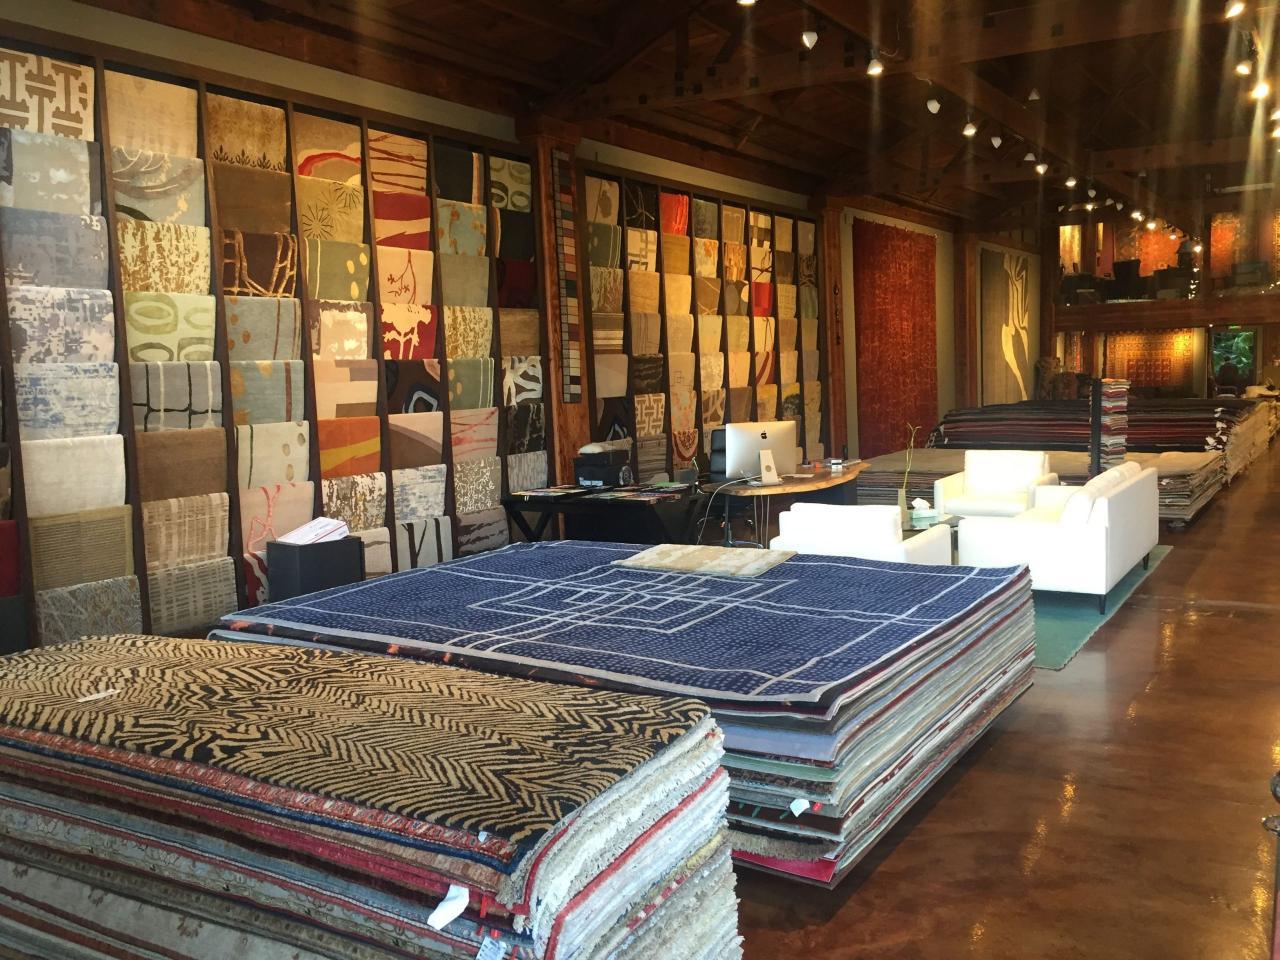 Rugs and Mats